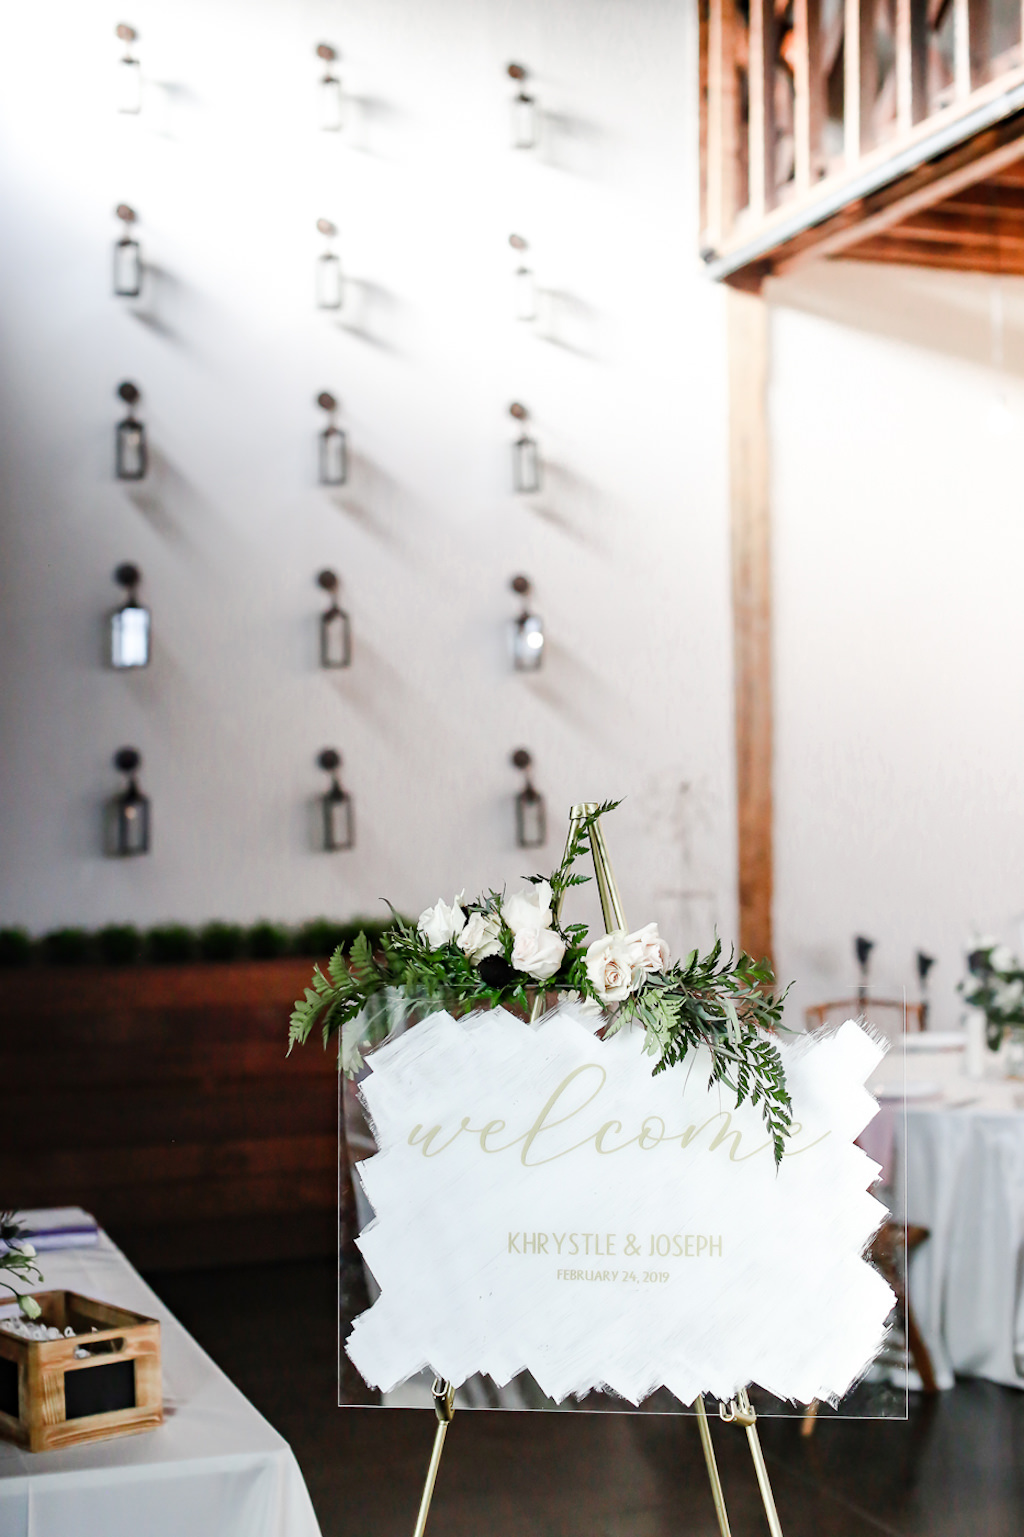 Industrial Boho Chic Wedding Reception Decor, White Painted Acrylic Plexiglass with Gold Script Welcome Sign with Greenery and Ivory Roses Arrangement | Tampa Wedding Planner Special Moments Event Planning | Wedding Photographer Lifelong Photography Studio